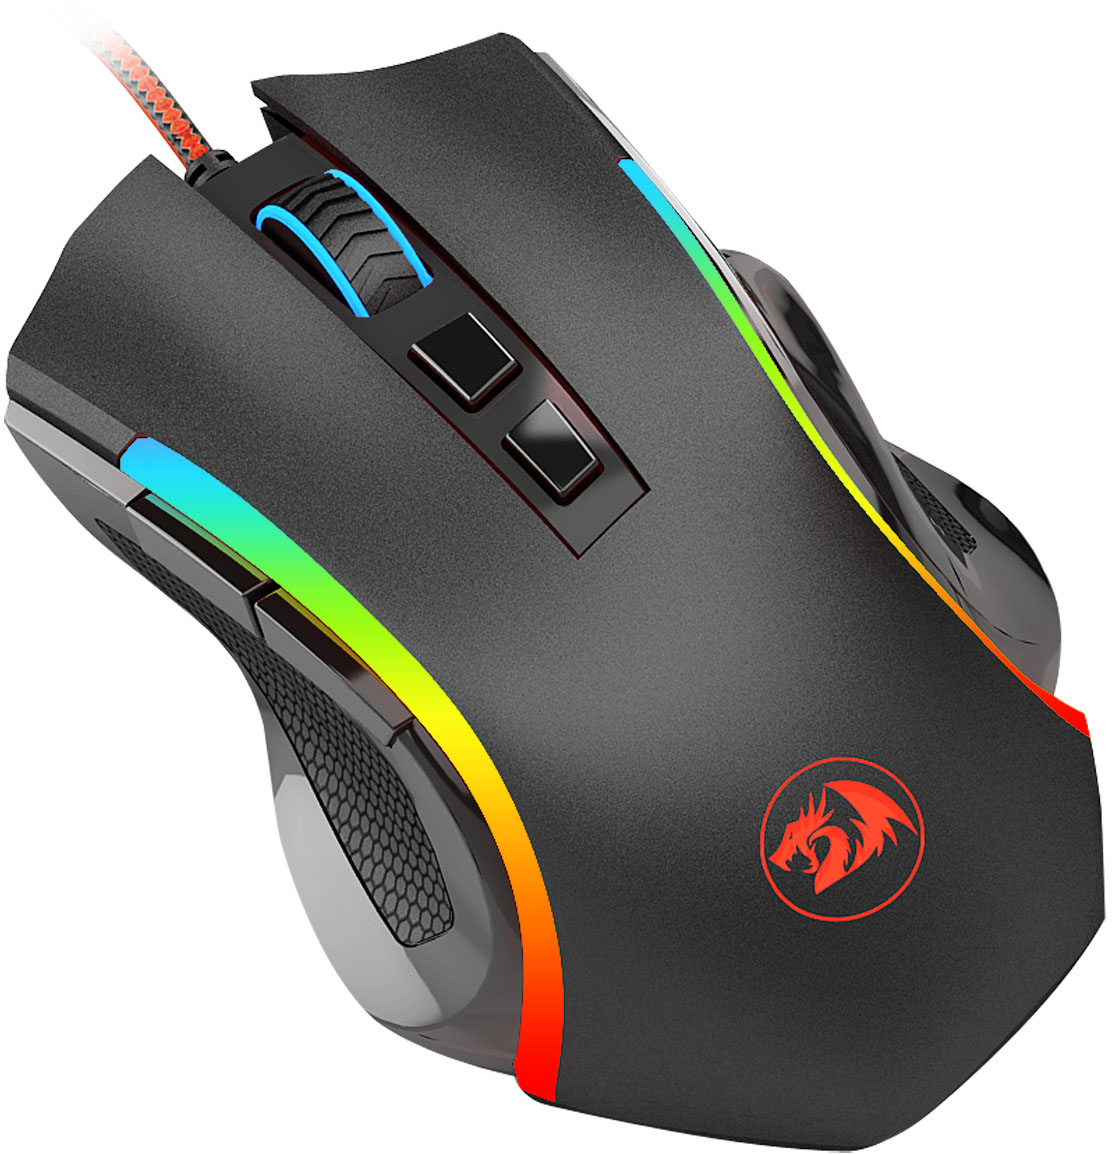 Angle View: AZIO - MS530 Antimicrobial Wired Optical Standard Ambidextrous Mouse